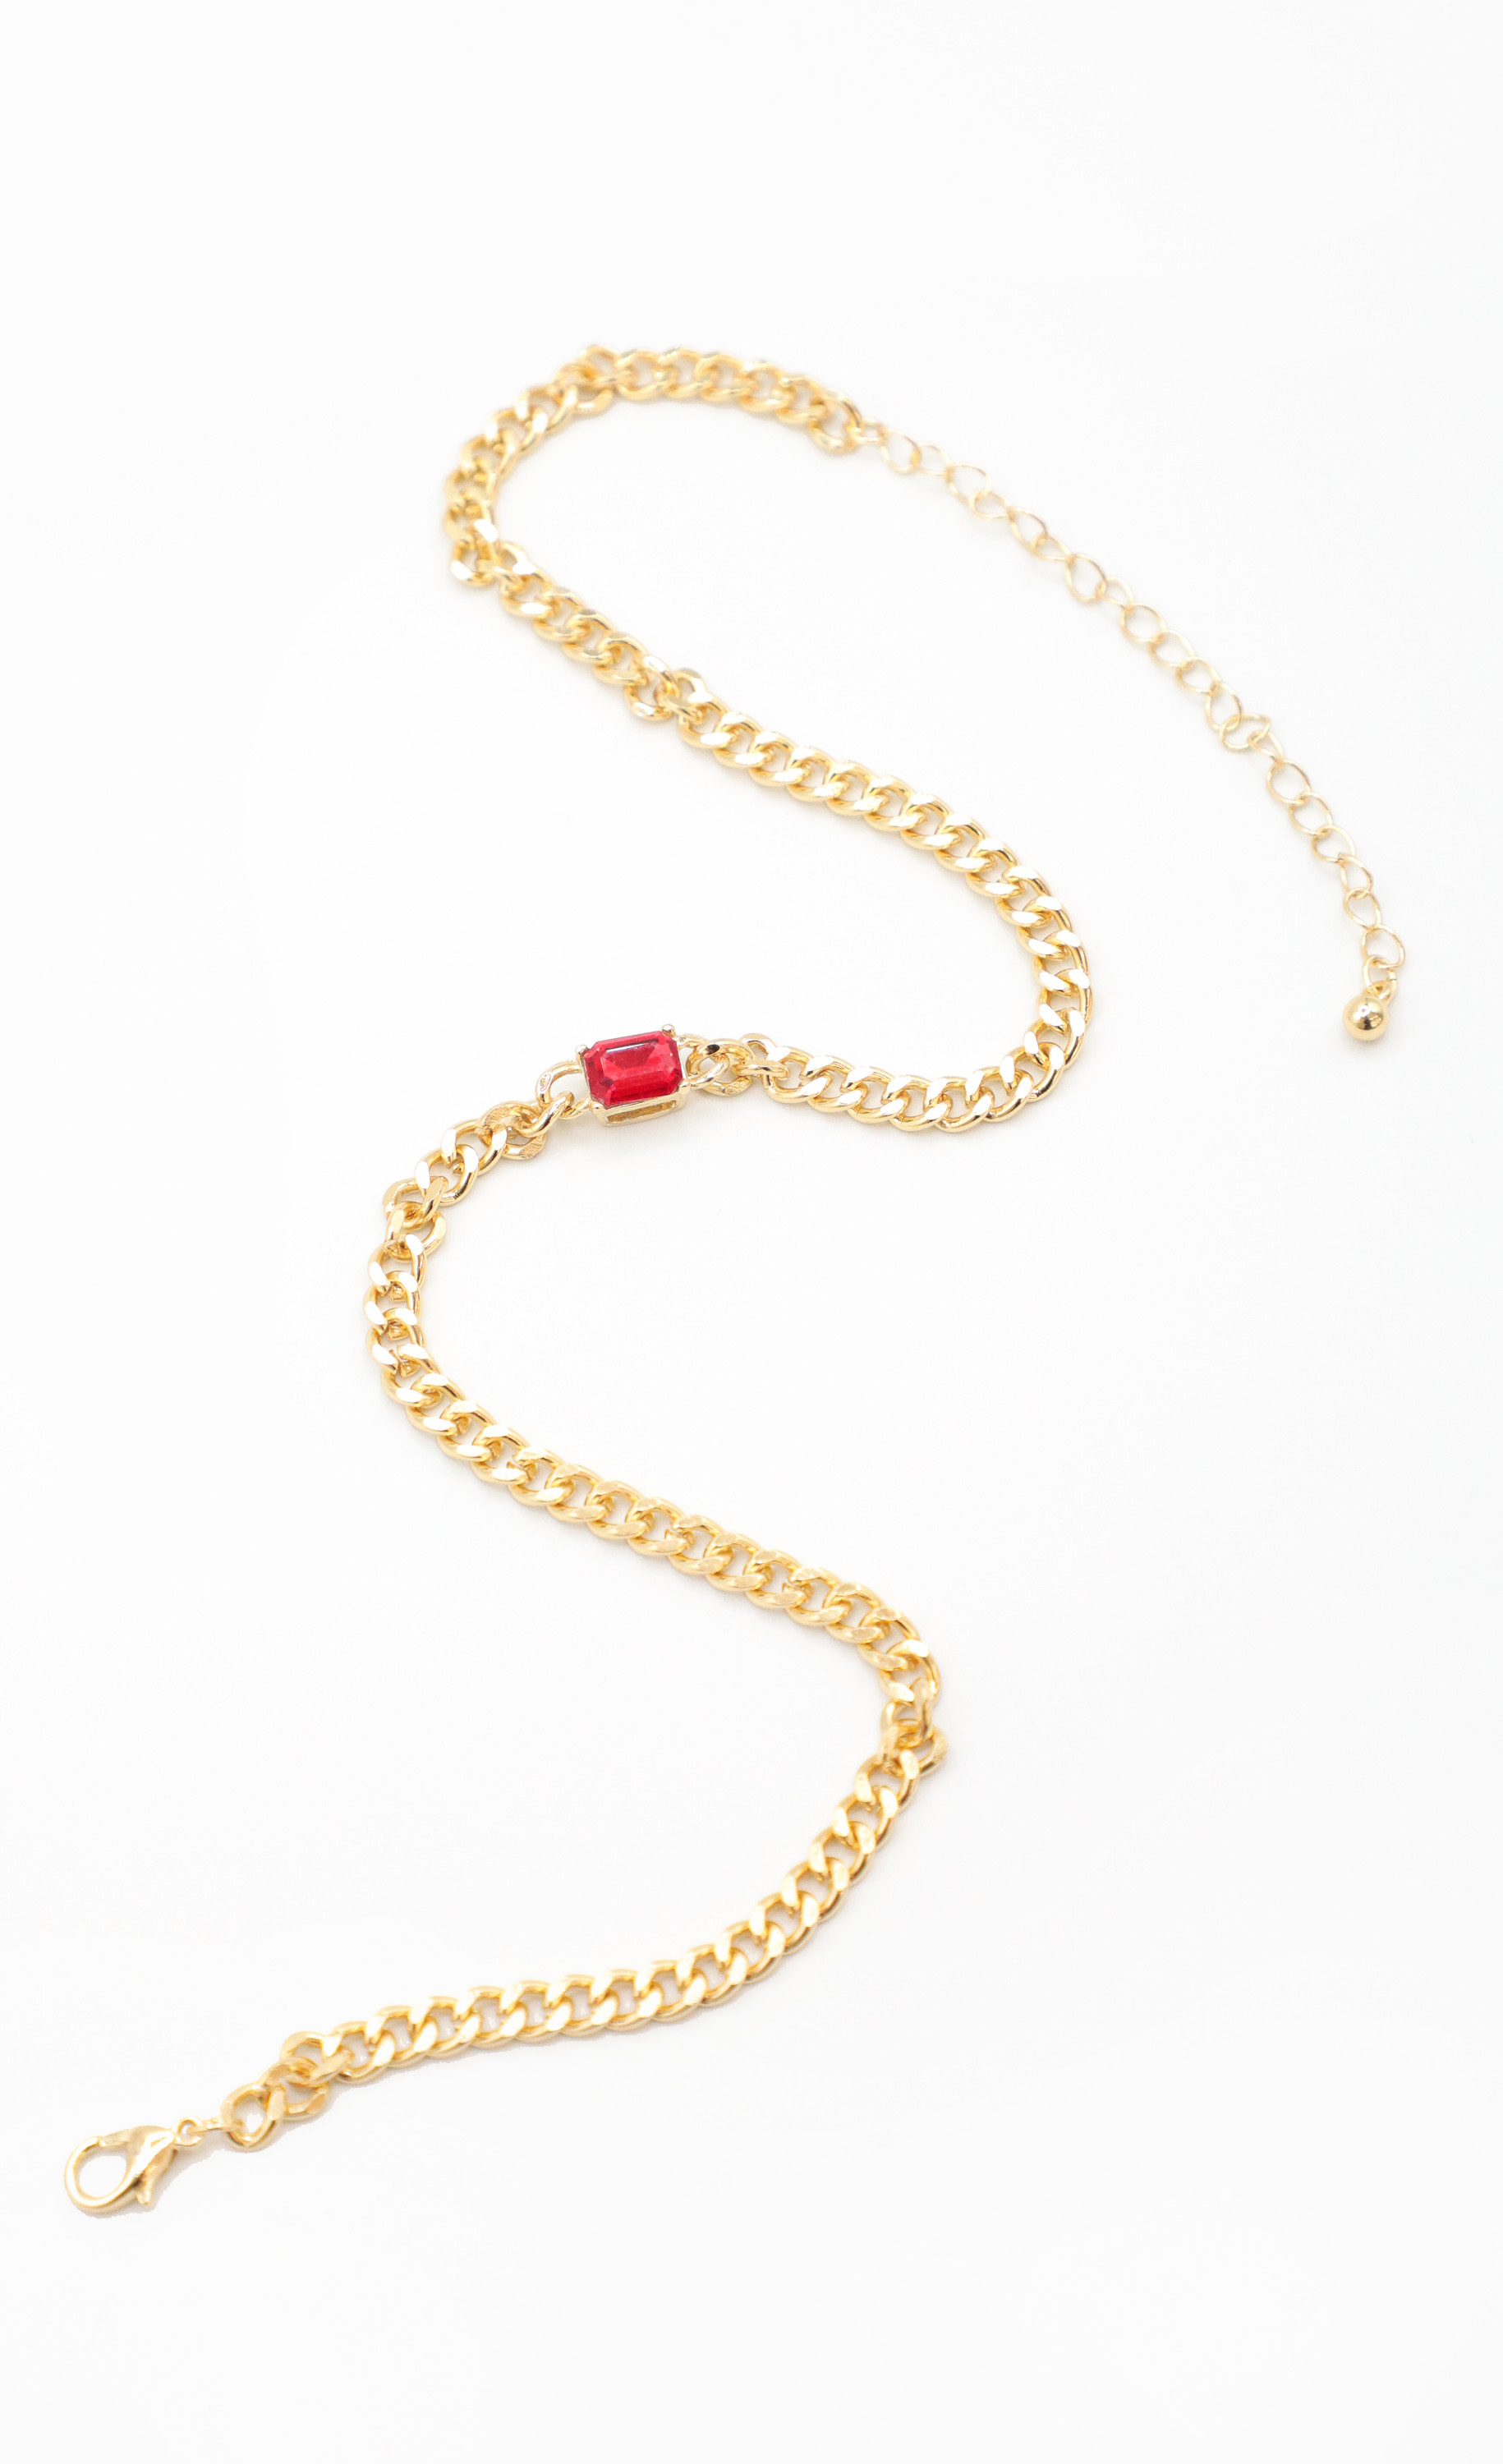 Hot Stuff Necklace in Gold